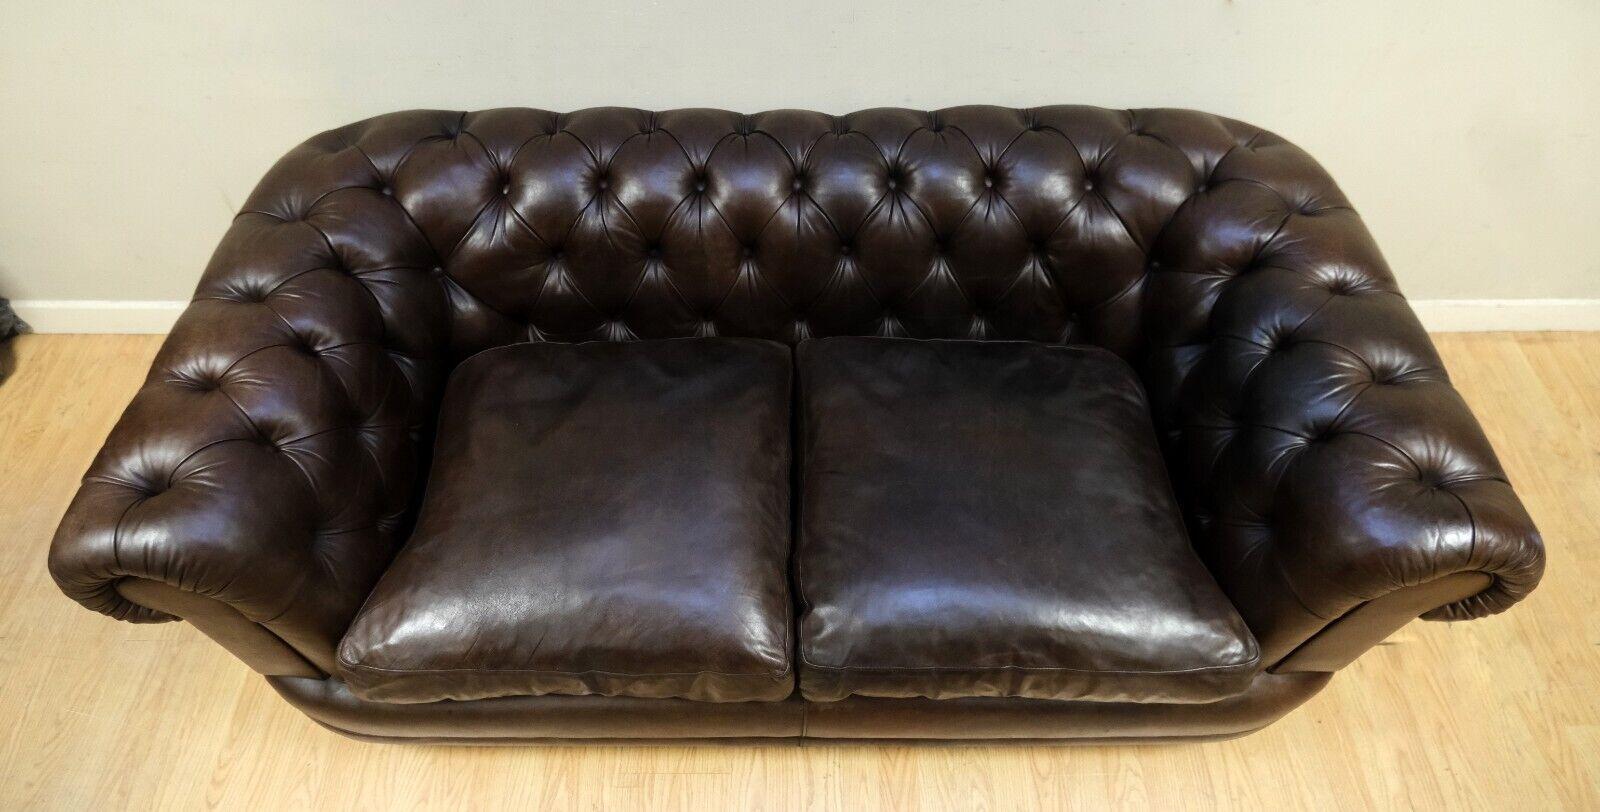 Choclate Brown Chesterfield Two Seater Leather Sofa Feather Filled Cushions 2